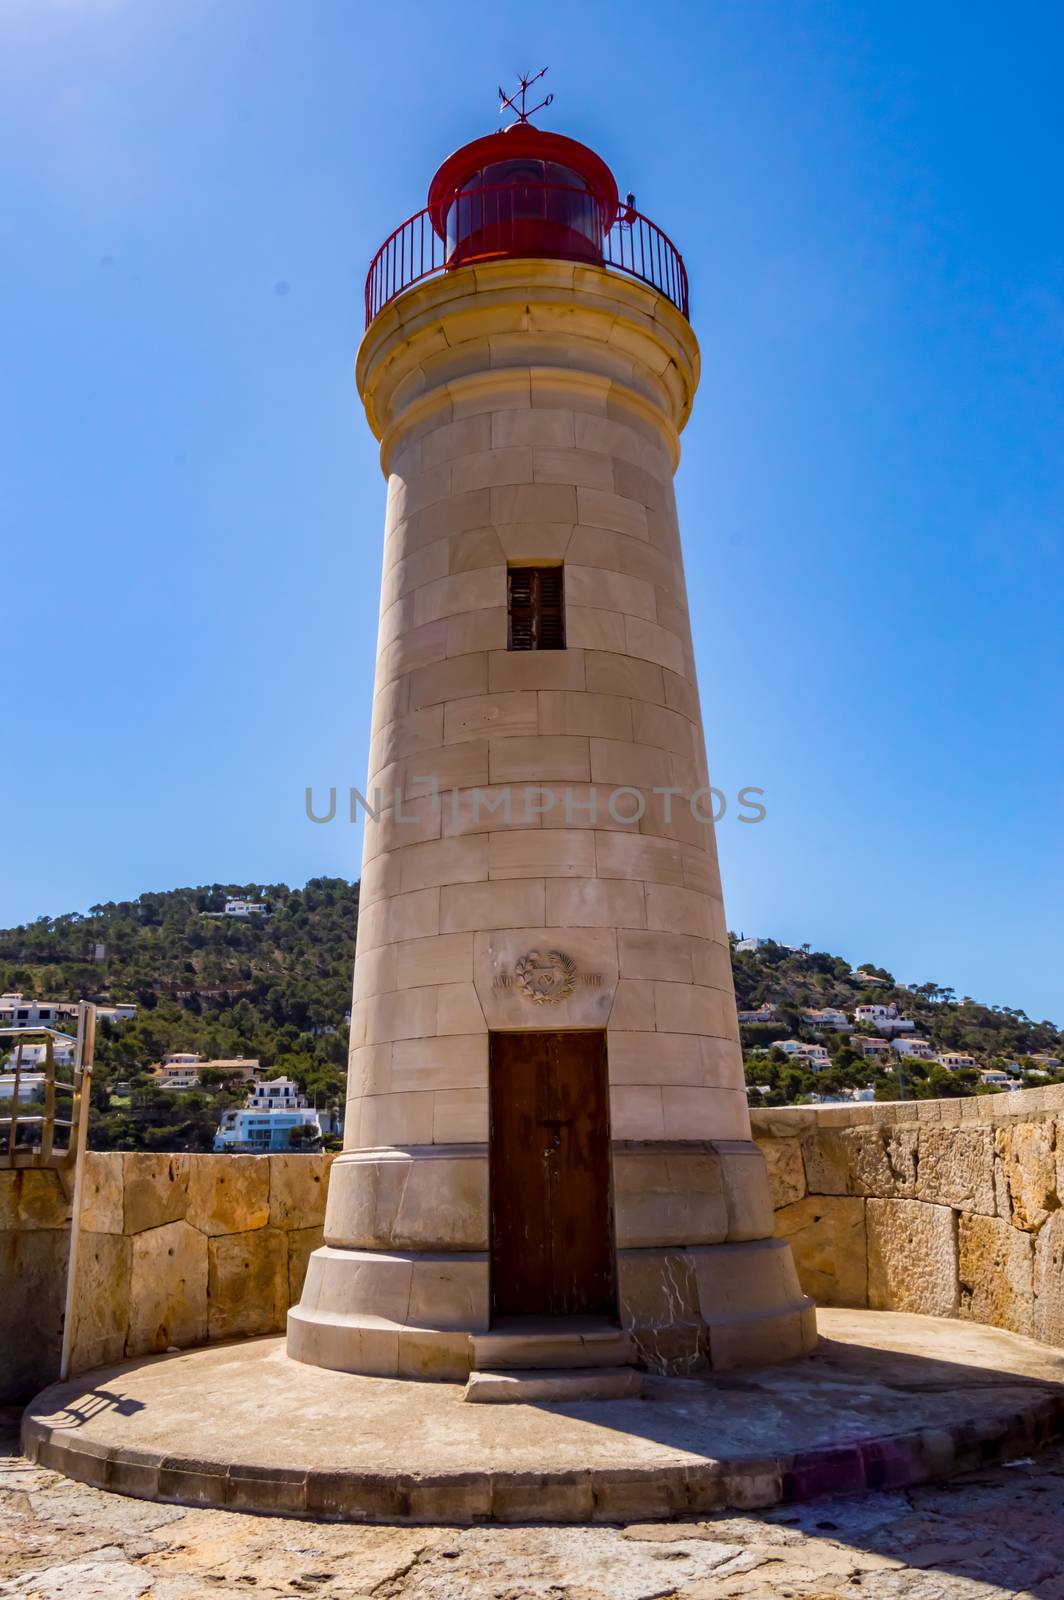 close-up of the lighthouse of the city of andratx north west of the island of palma de mallorca in Spain